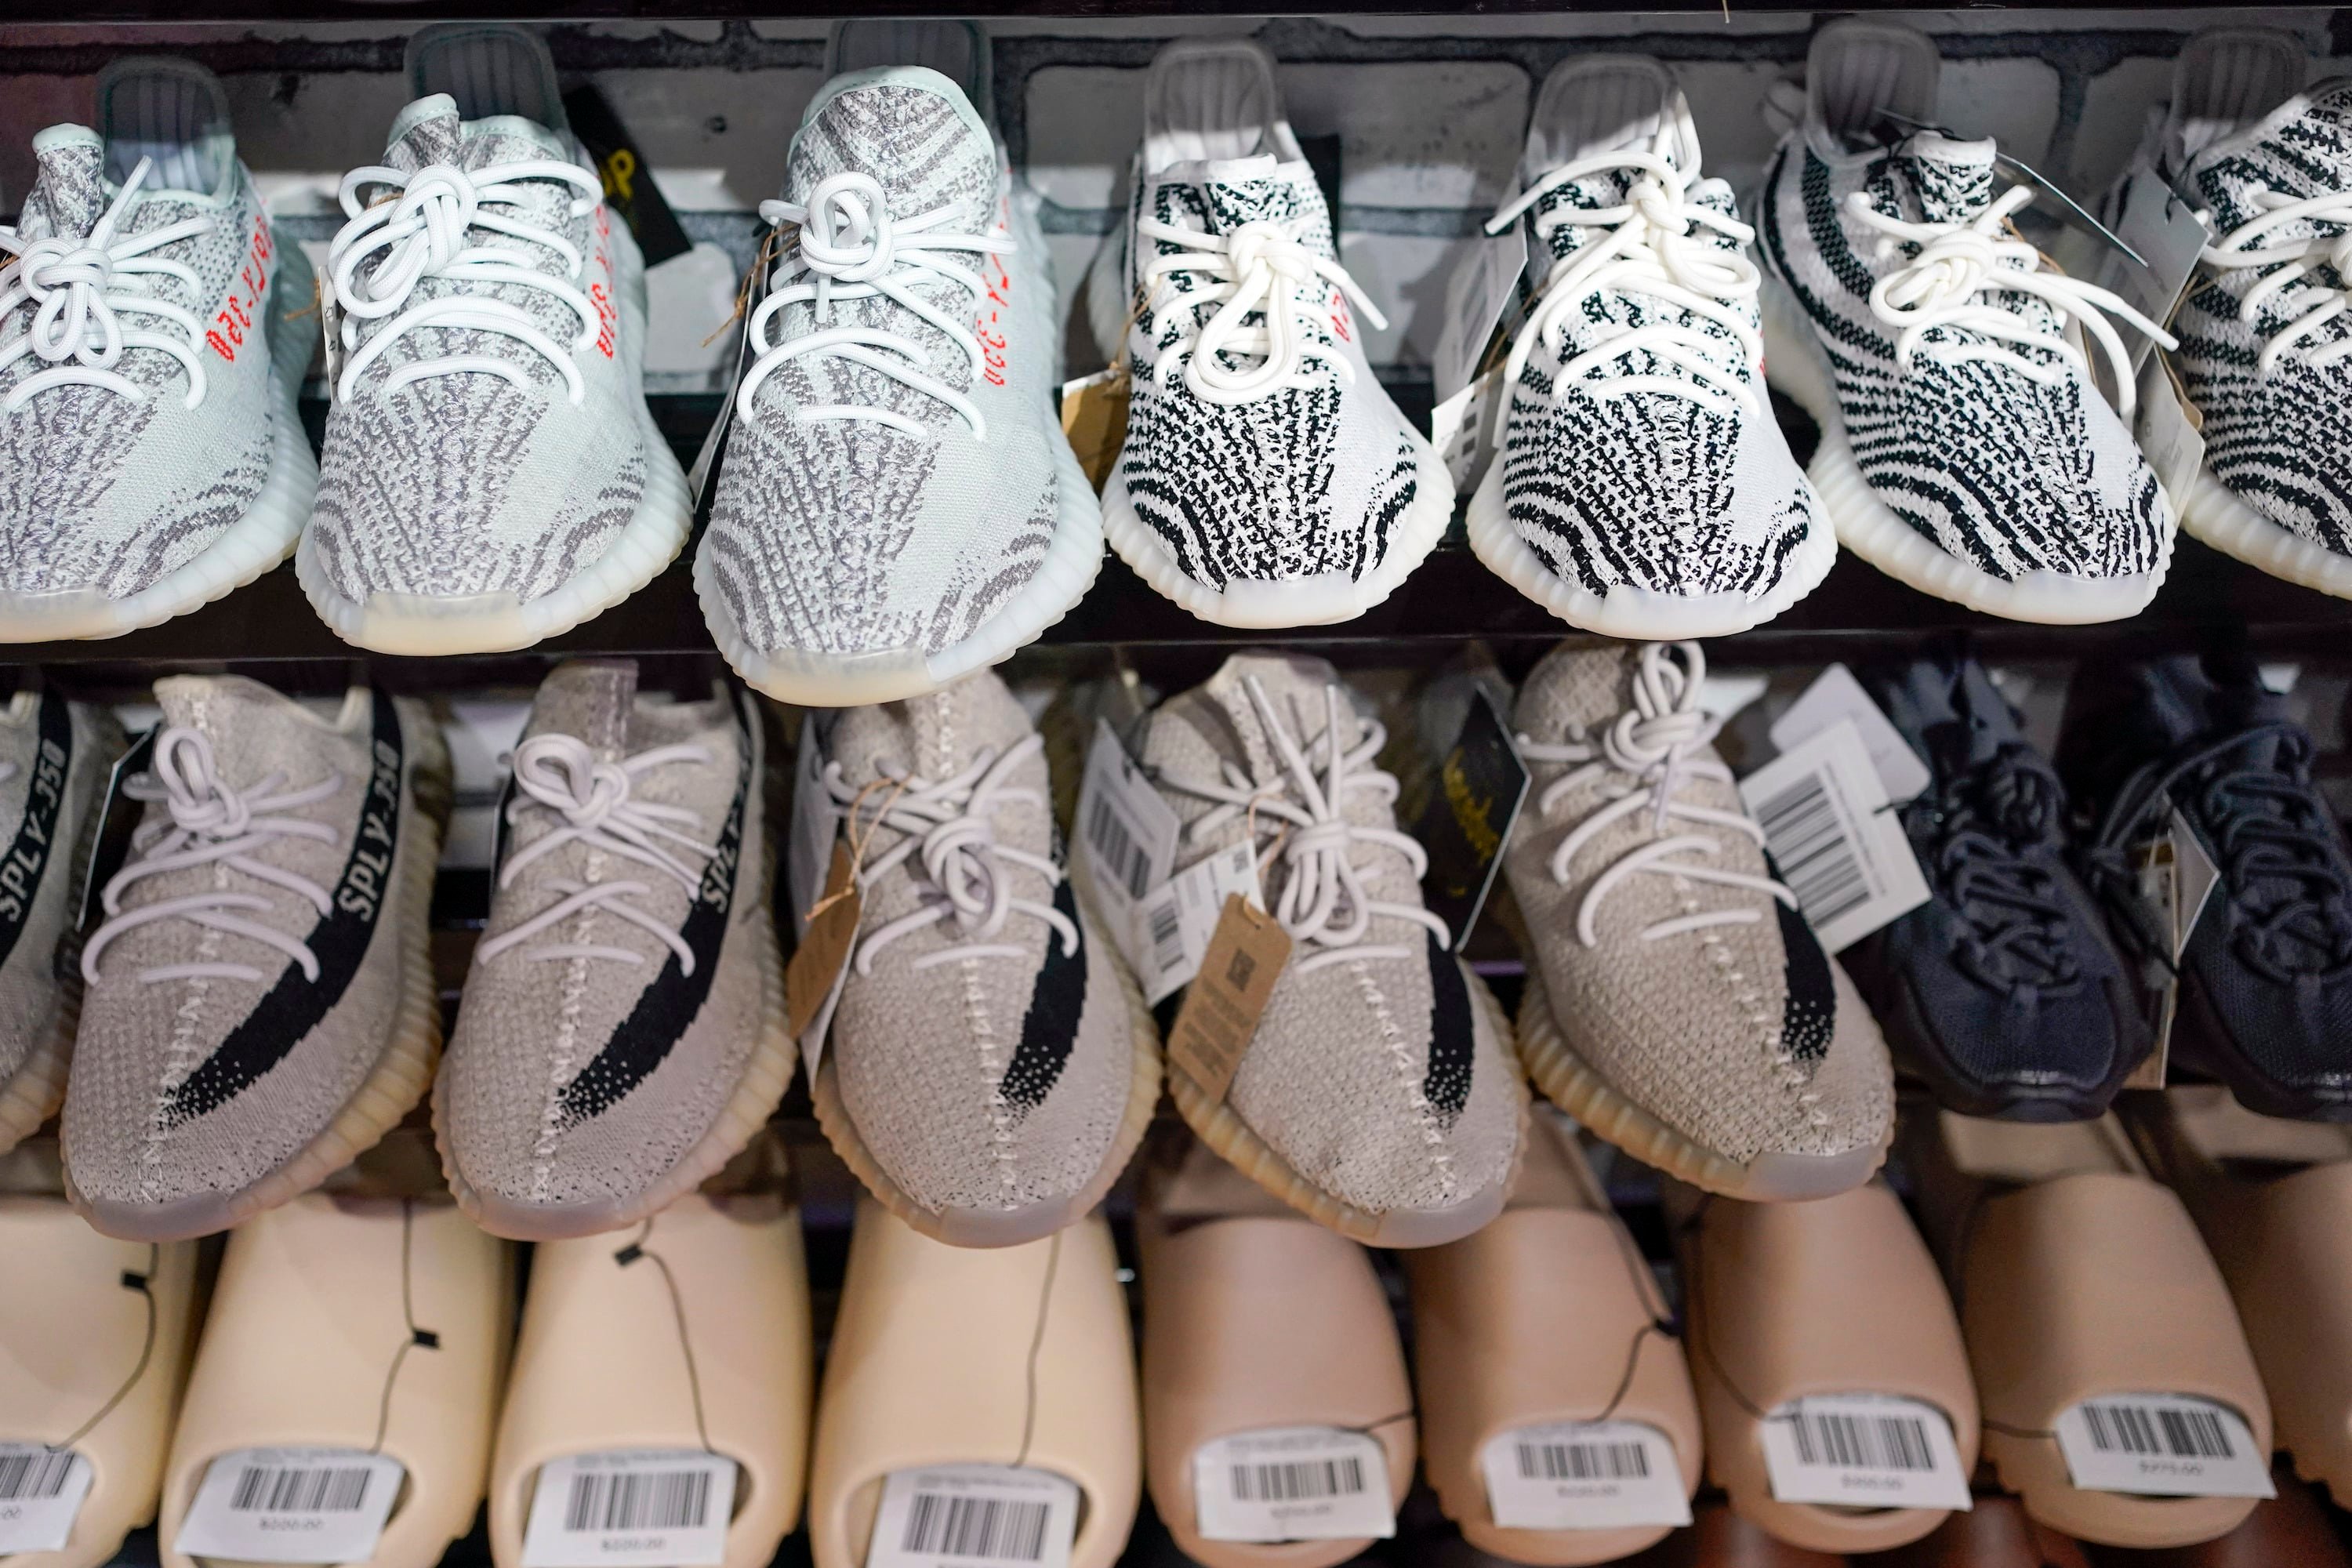 Adidas says it may write off remaining unsold Yeezy shoes after breakup  with Ye | Courthouse News Service